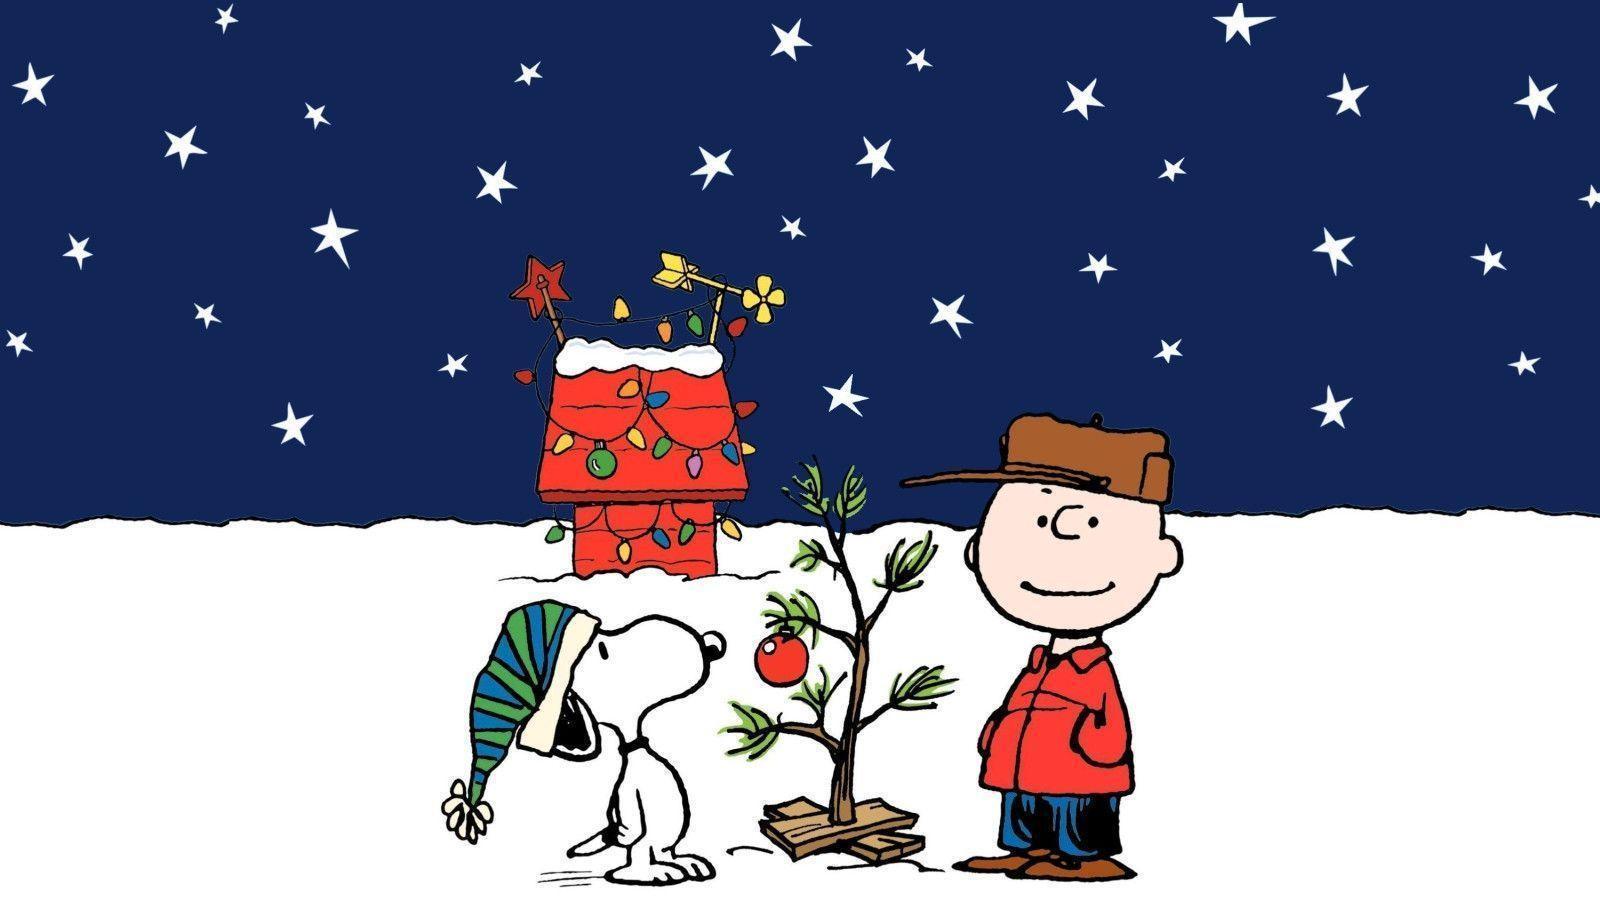 Snoopy Christmas Picture. Full Desktop Background